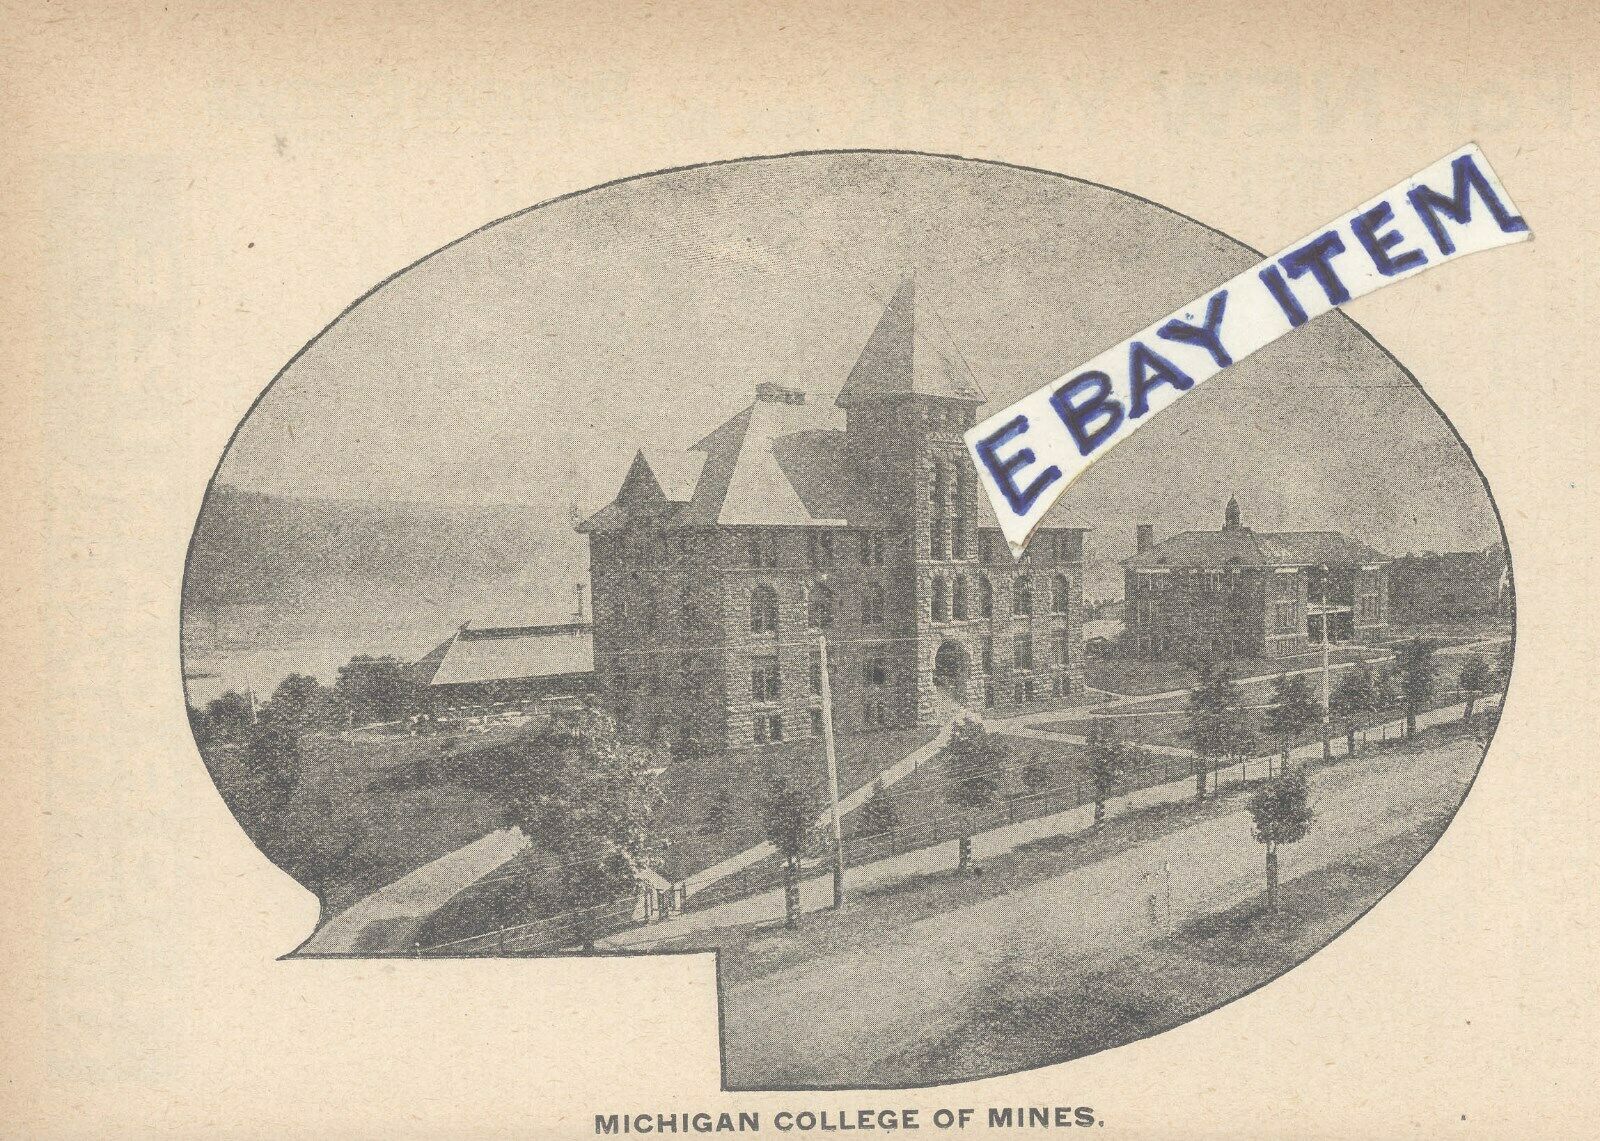 Orig Printed Matter From1899 Houghton Michigan College Of Mines School Of Mining